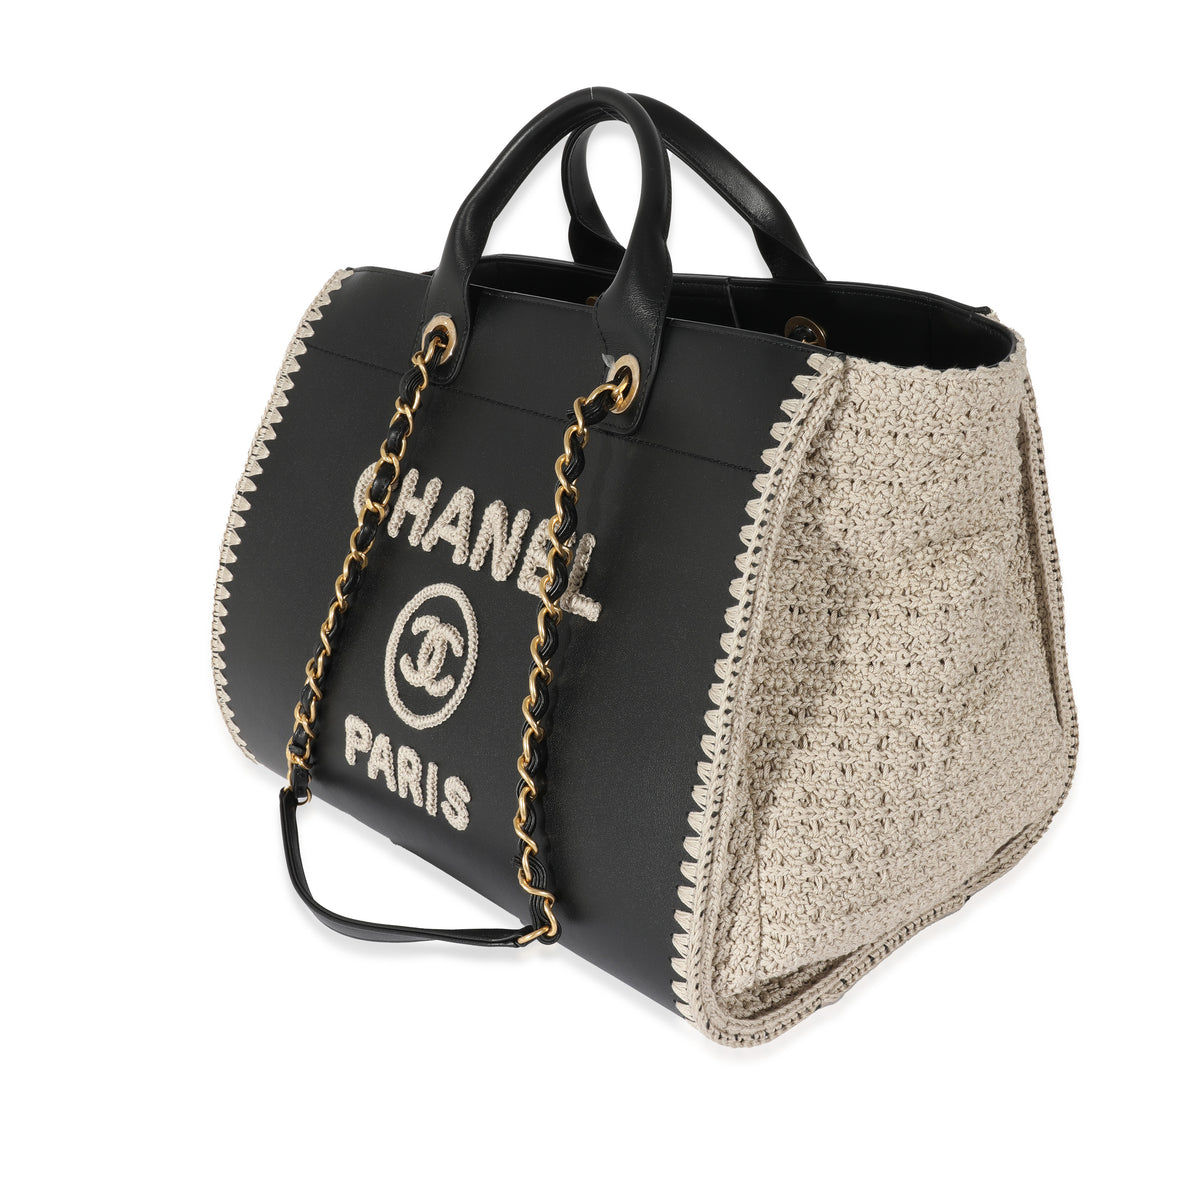 Chanel Chanel Black Leather Crochet Deauville Tote